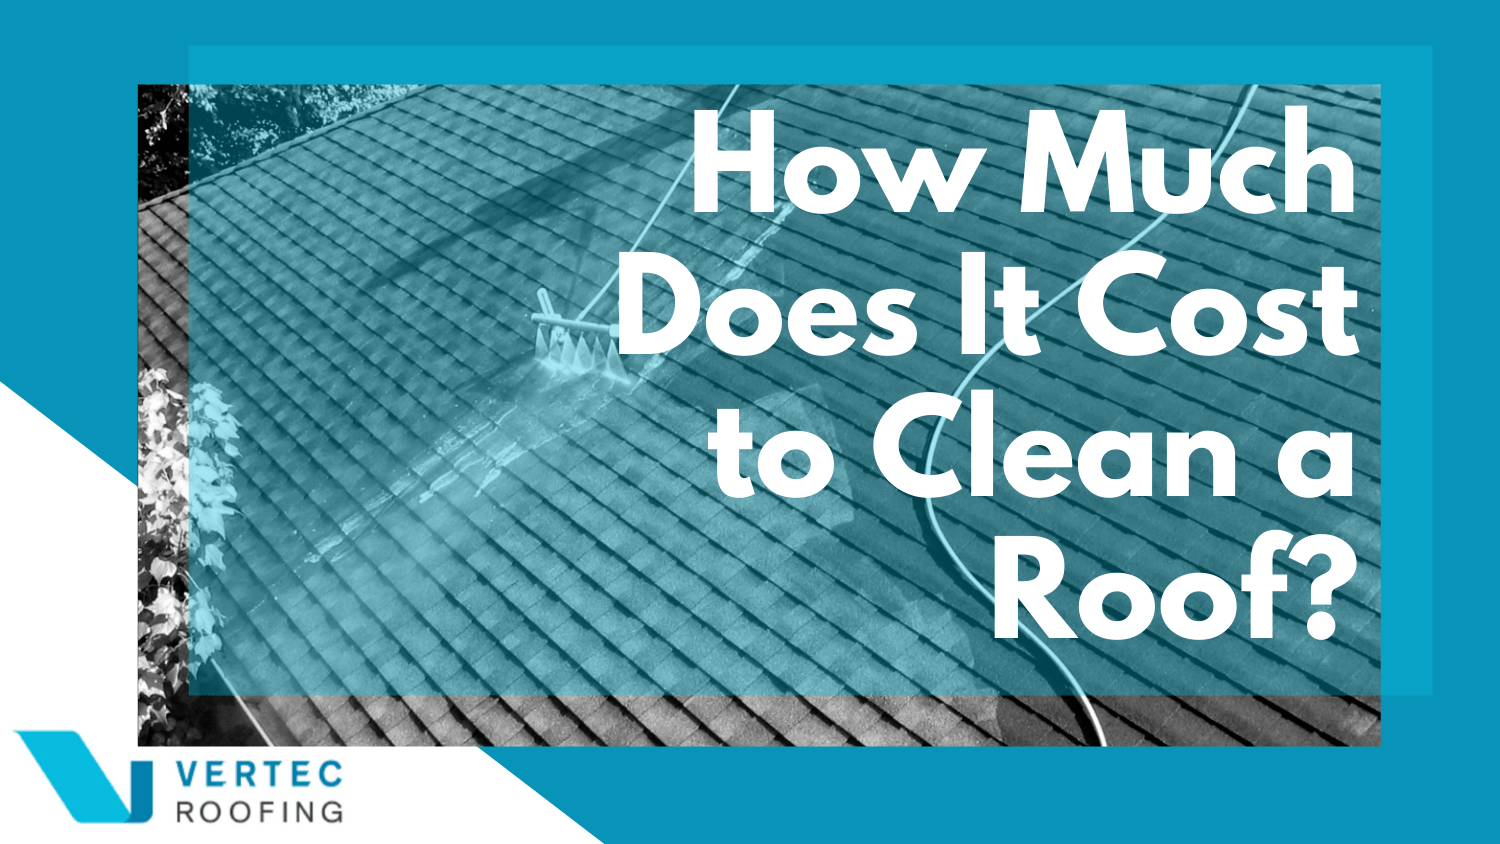 How Much Does It Cost to Clean a Roof?